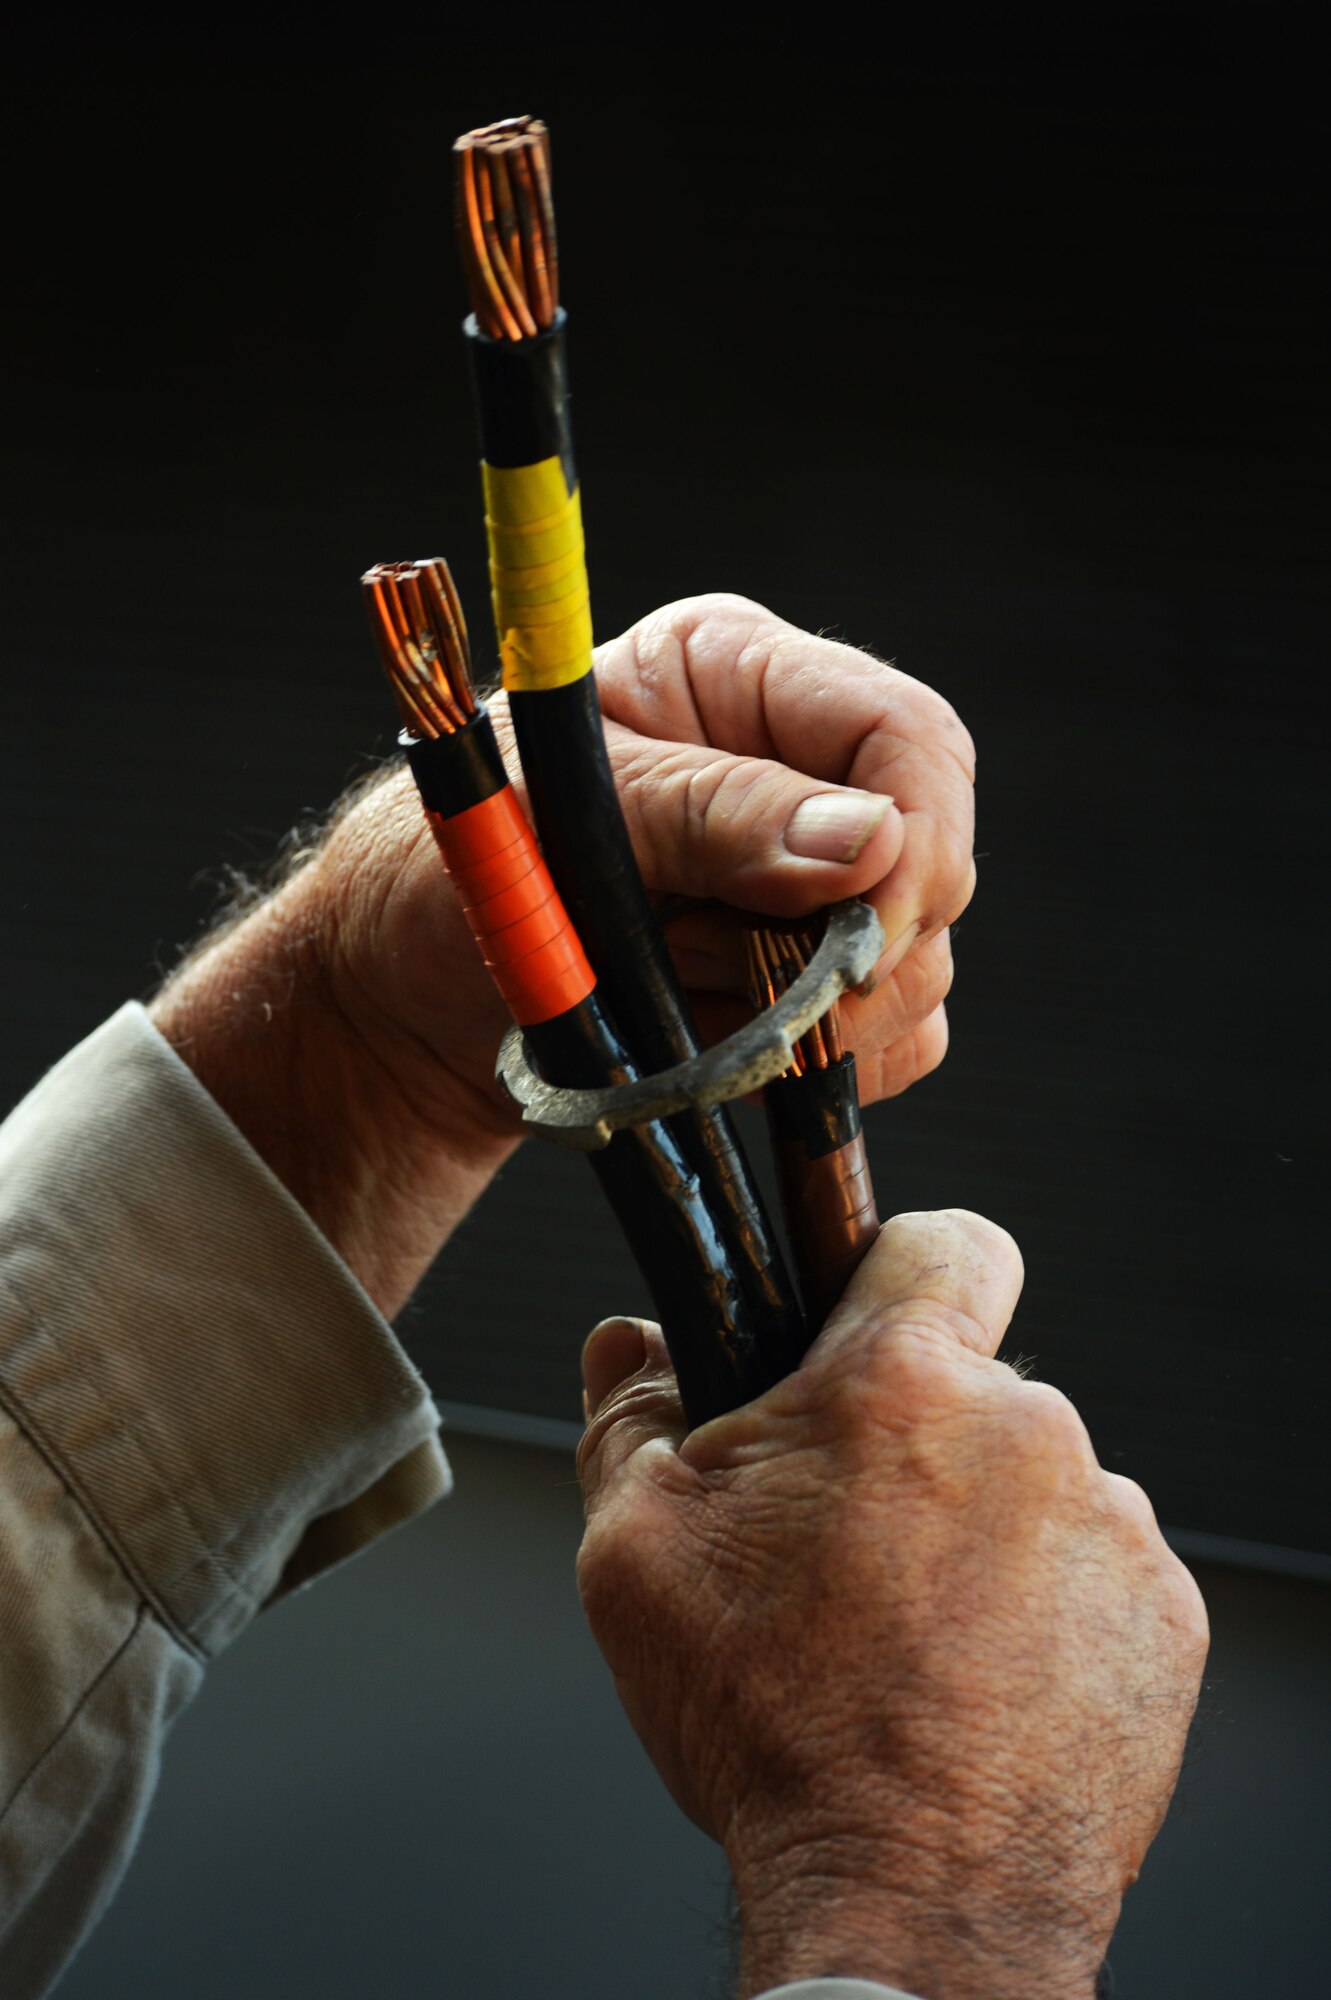 A 20th Civil Engineer Squadron electrical systems worker prepares heavy duty copper wire before installing an electrical panel at Shaw Air Force Base, S.C., July 17, 2014. Before the installation of a new air conditioning unit, the 20th CES electrical systems Airmen prepare a high-voltage electrical panel with the proper wires needed to provide adequate power to the unit. (U.S. Air Force photo by Airman 1st Class Jensen Stidham/Released)